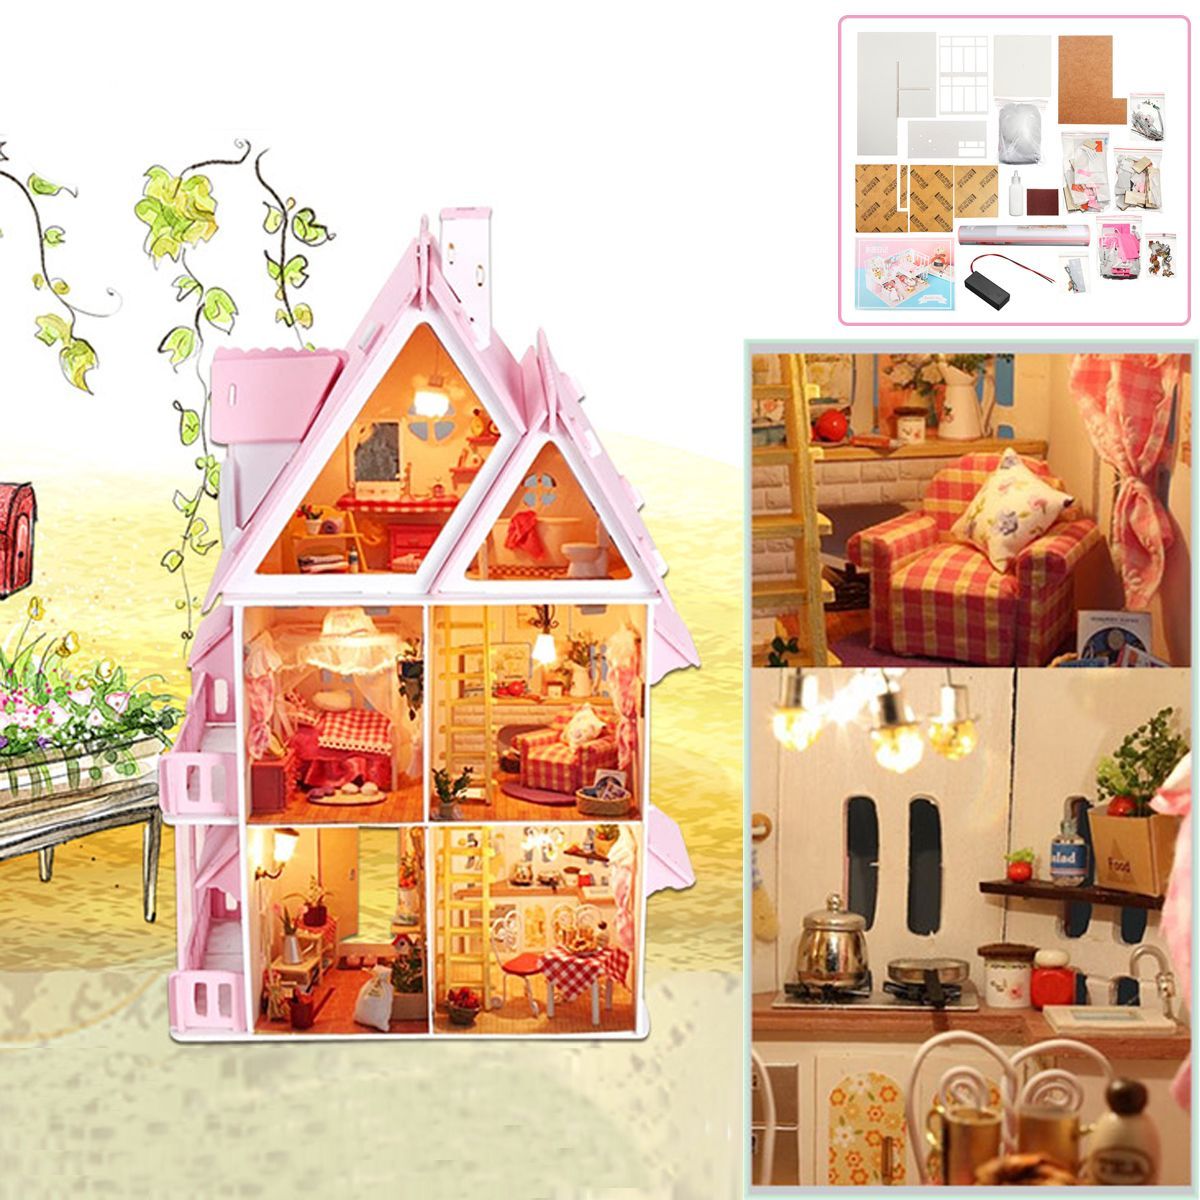 DIY-Wooden-Dolls-House-Doll-House-LED-Light-Miniature-Dollhouse-w-Furniture-Doll-House-Accessories-1477001